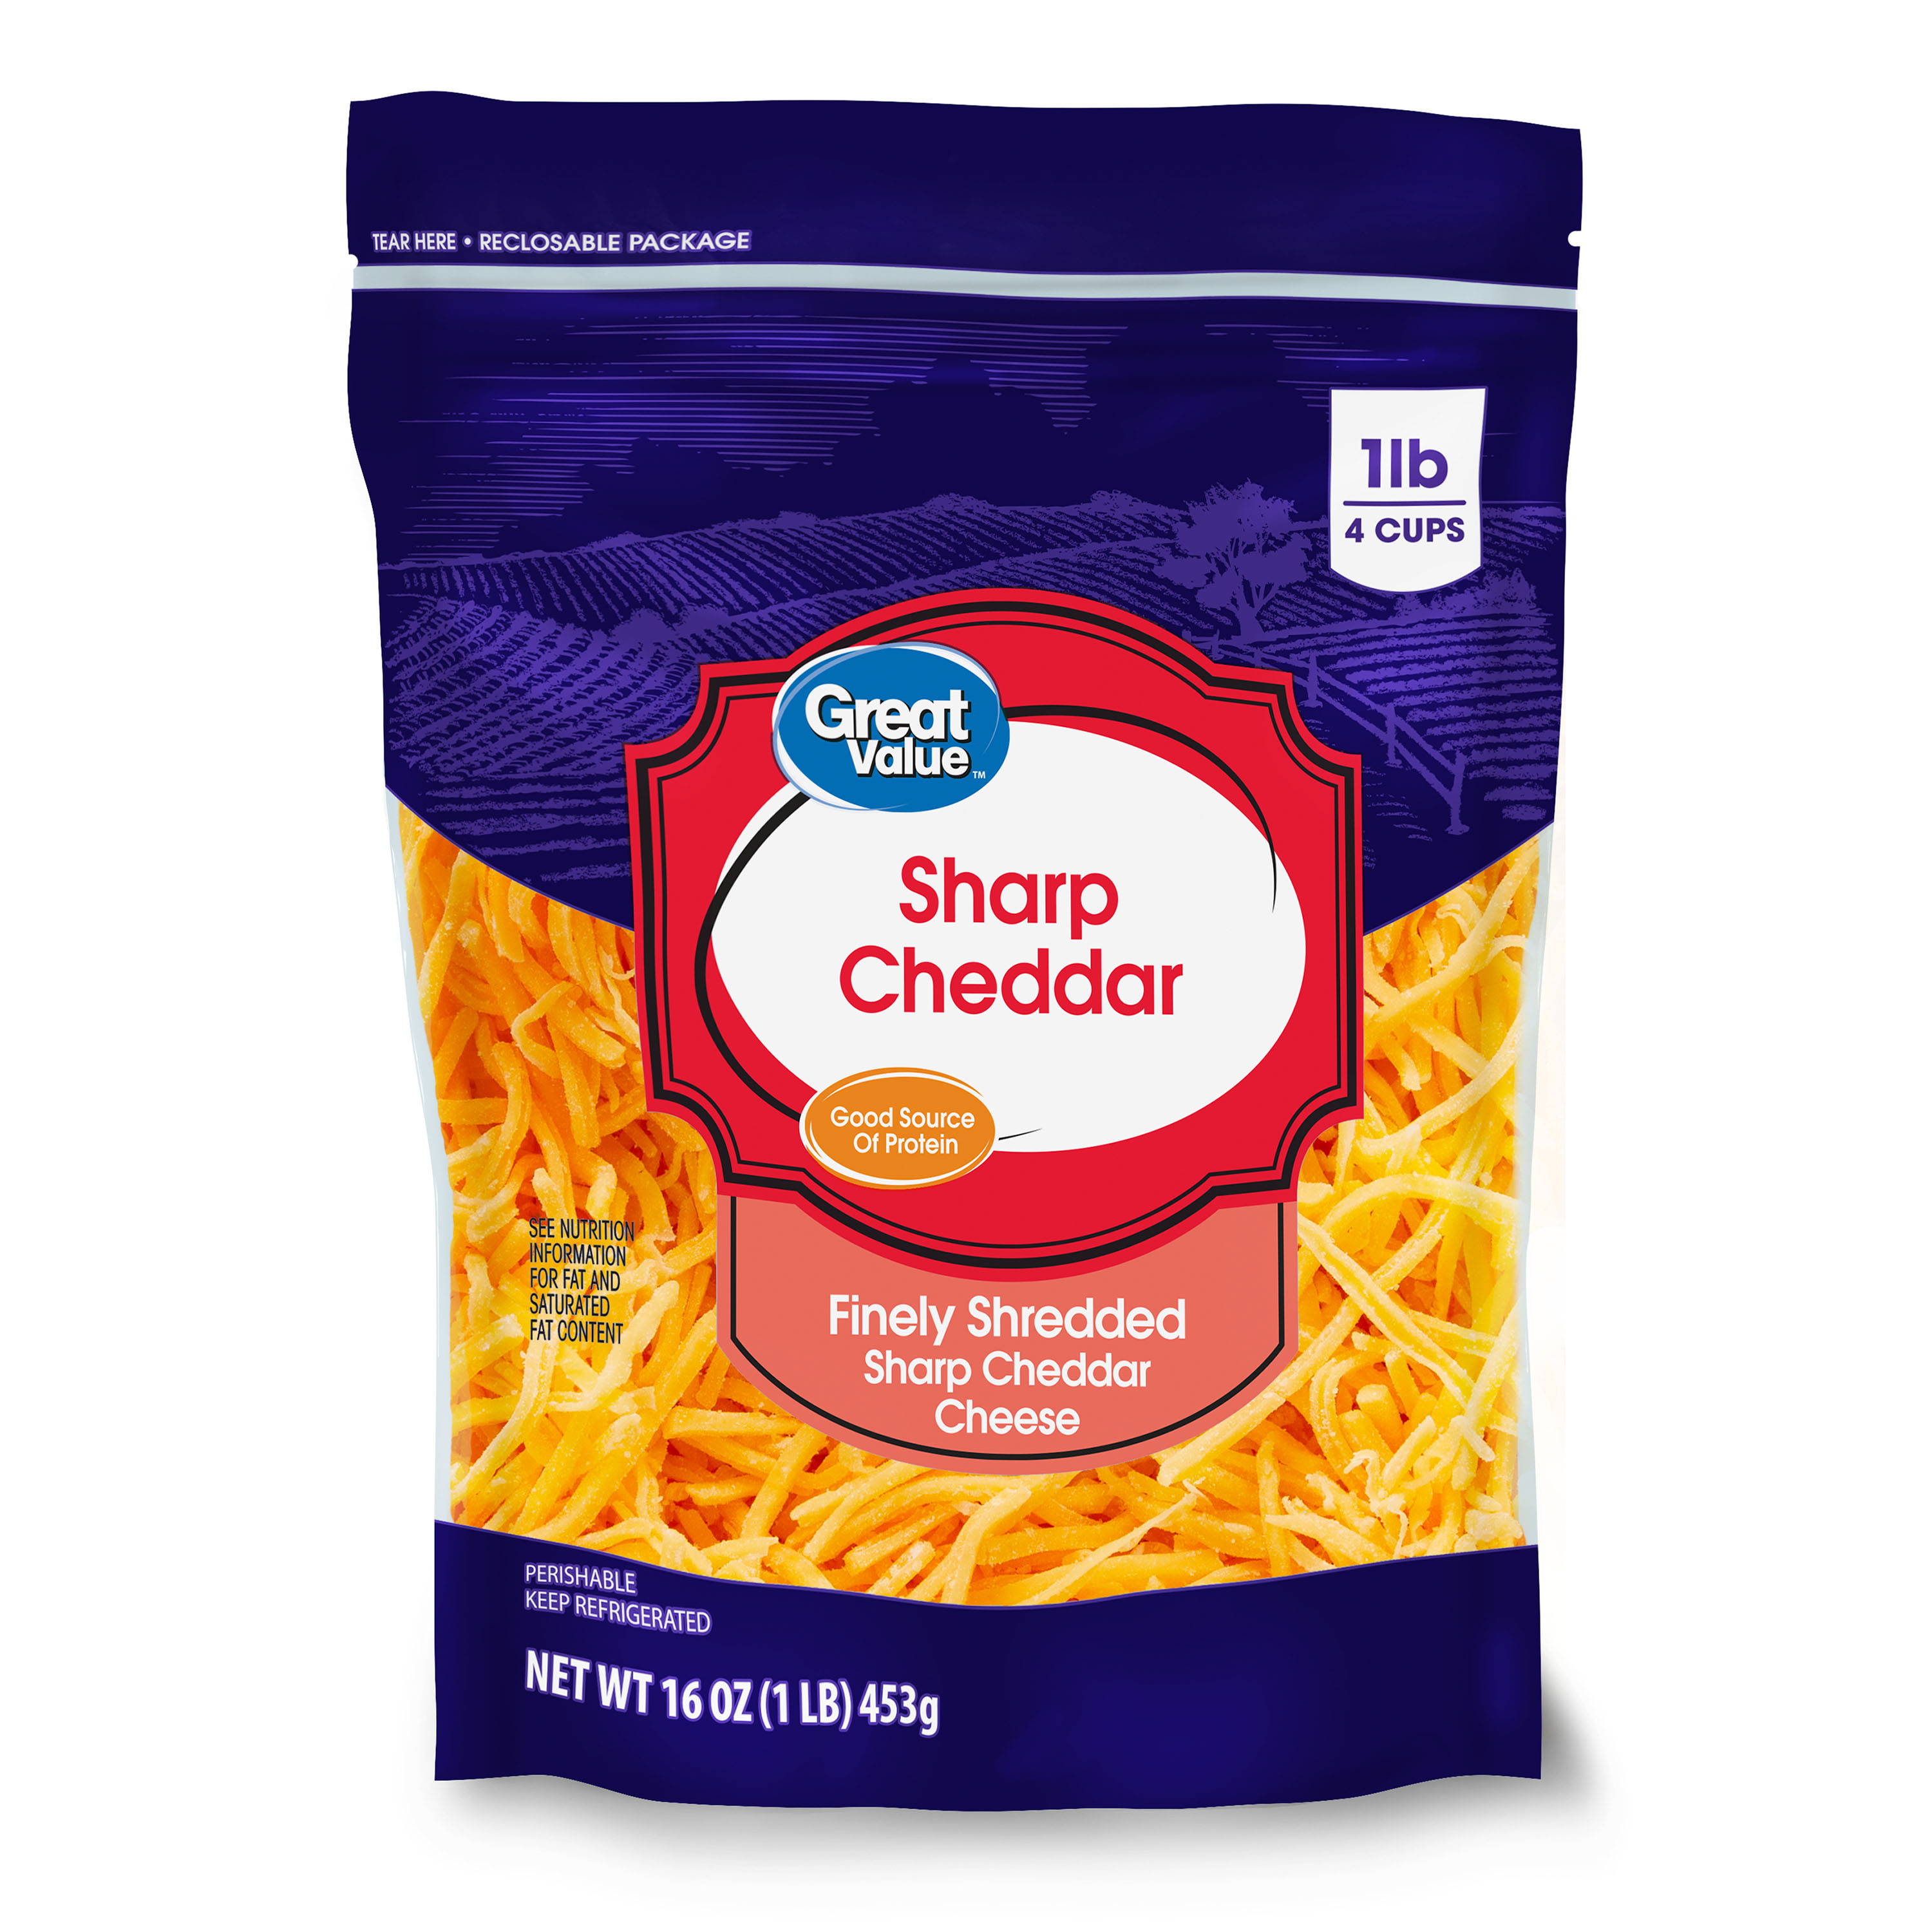 Great Vallue Great Value Finely Shredded Sharp Cheddar Cheese, 16